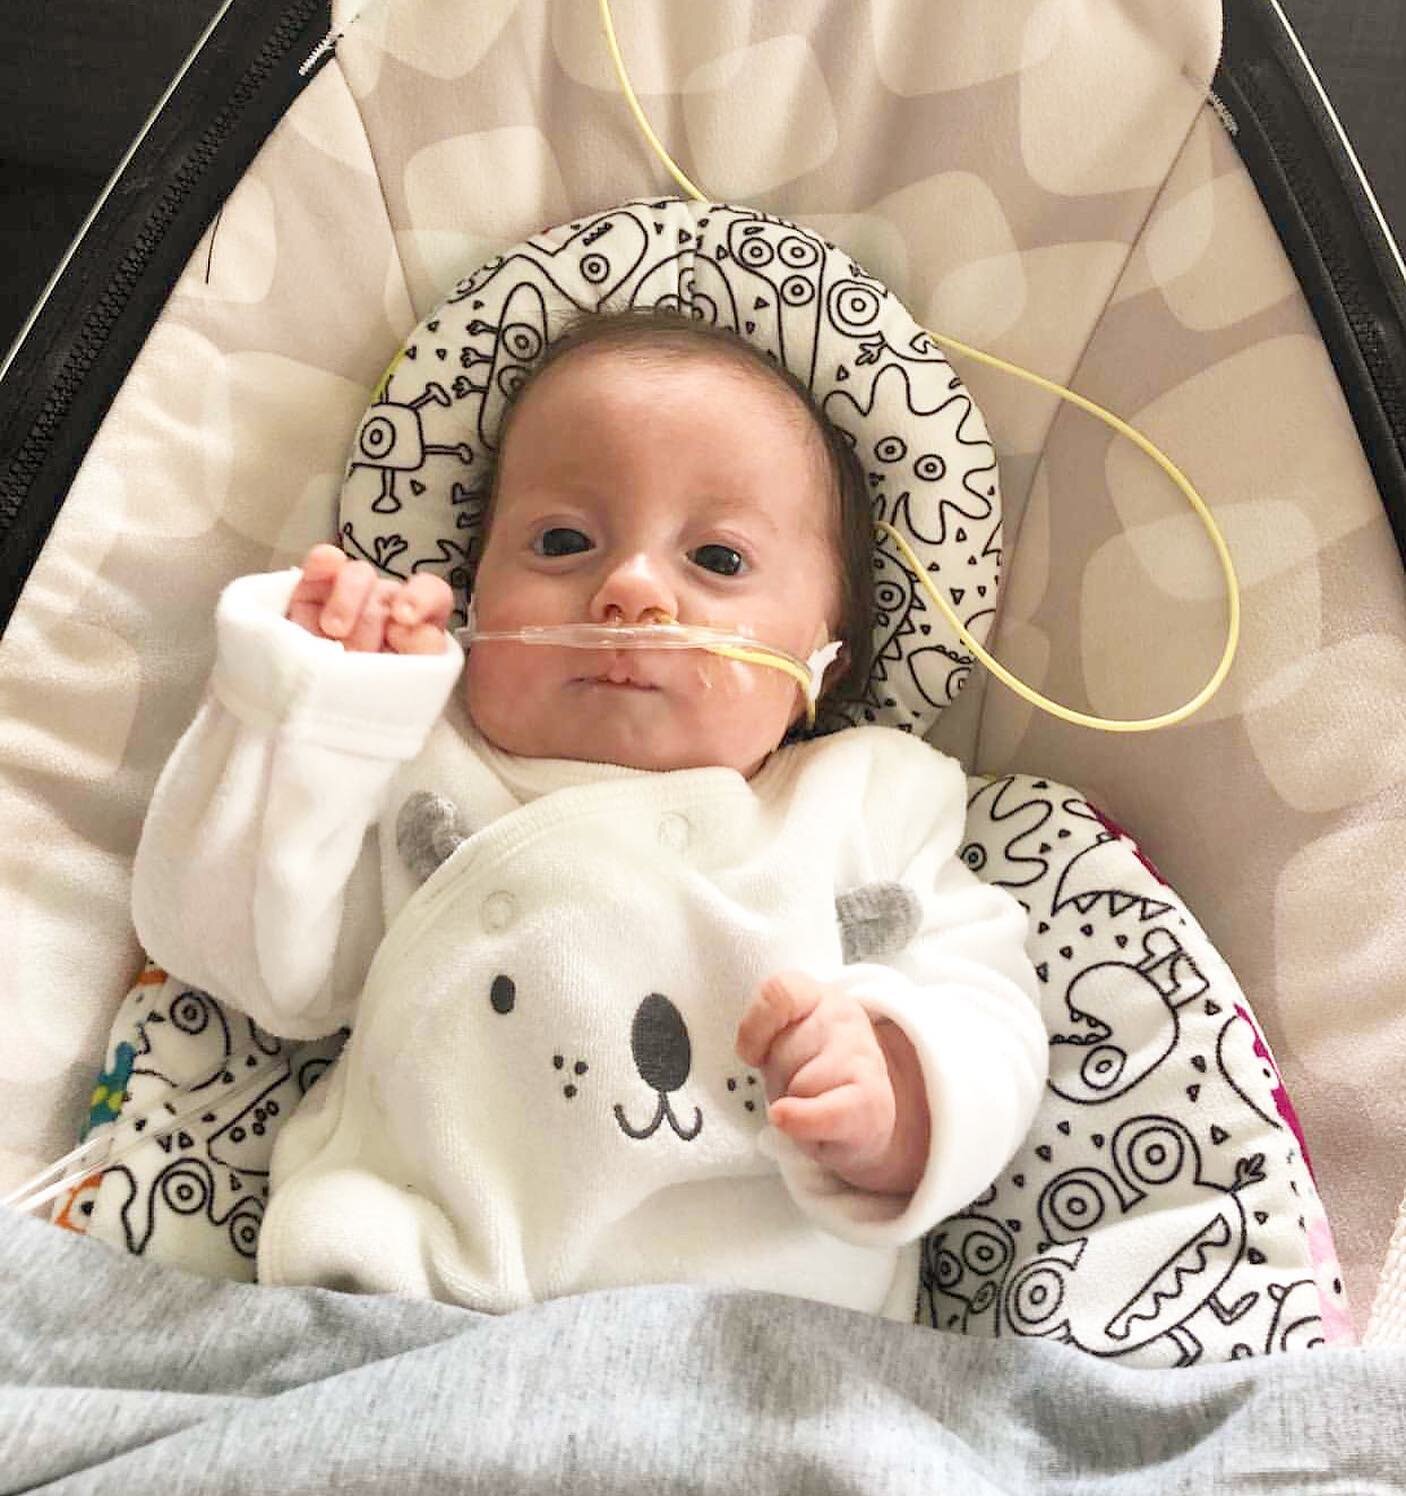 We want to wish Eliana a beautiful Happy 1st birthday from heaven. 

What started off as an anonymous donation several months ago from Eliana&rsquo;s mom, @valbonat80, has turned into a beautiful friendship.

Valbona and her family wanted to honor El